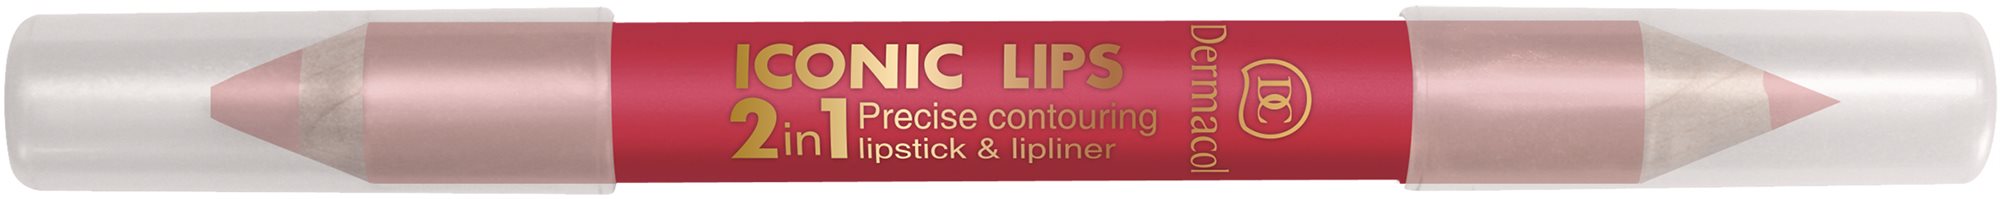 DERMACOL Iconic Lips No.04 10 g